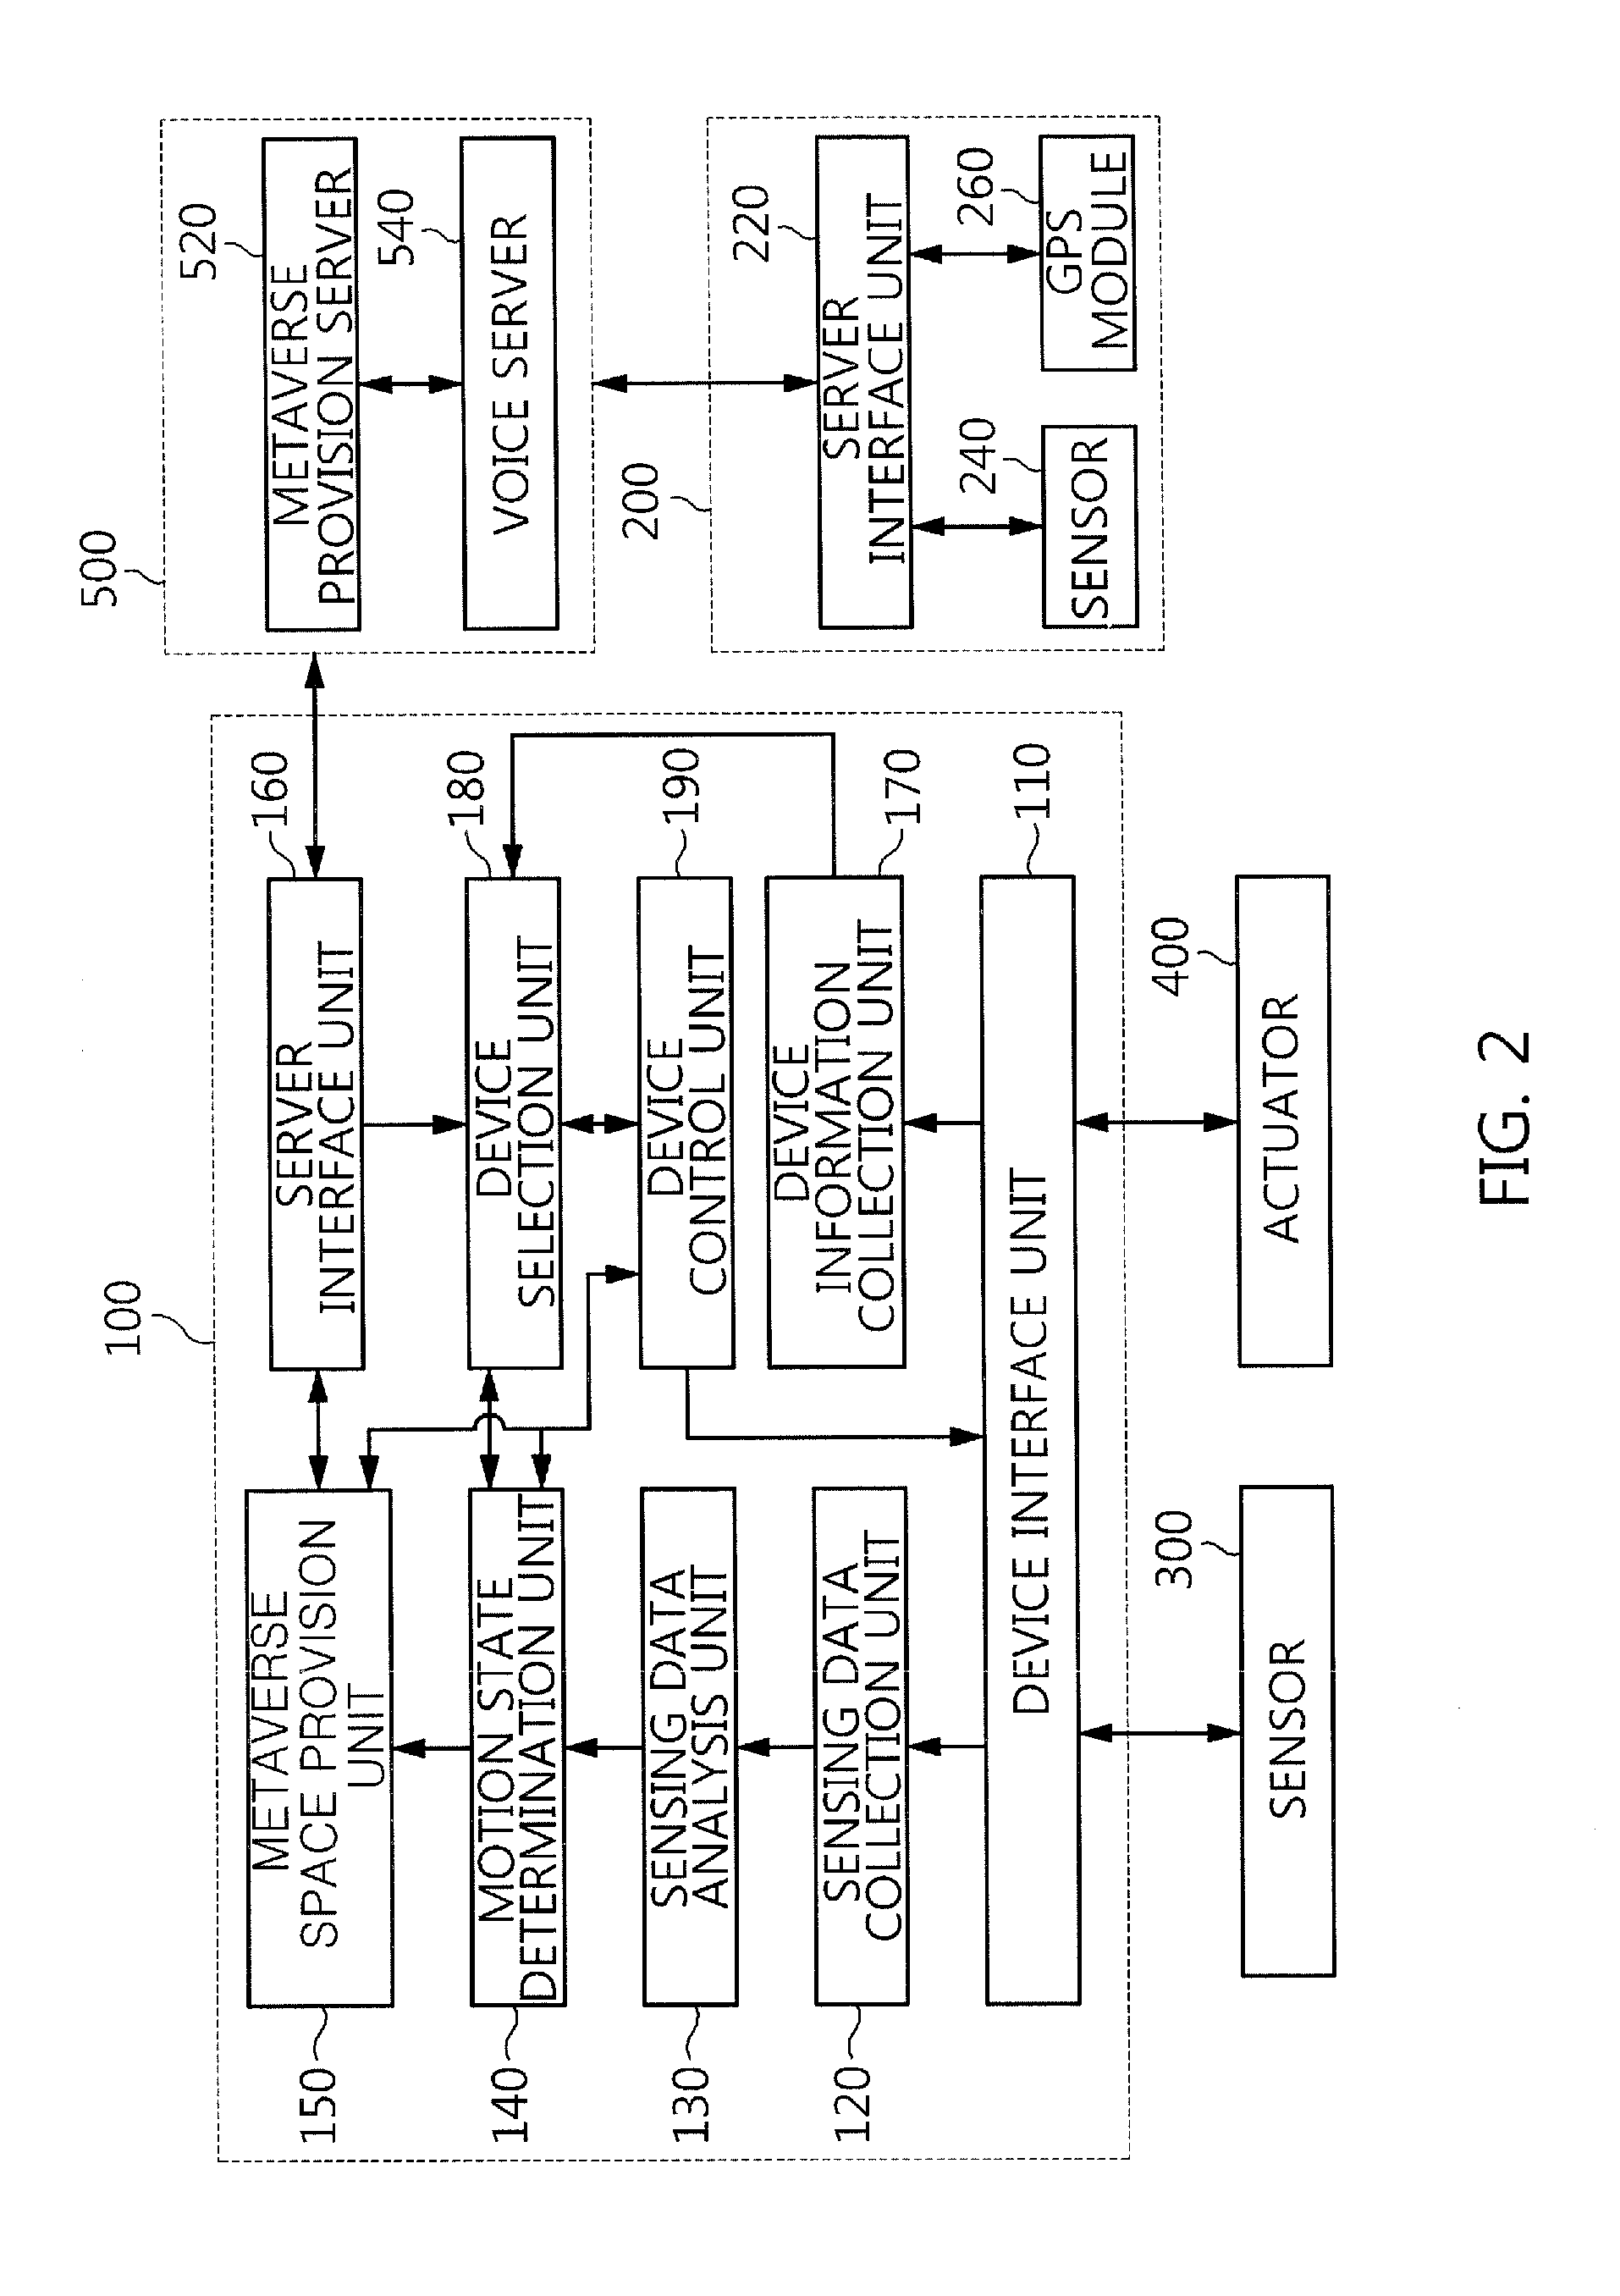 Metaverse client terminal and method for providing metaverse space capable of enabling interaction between users